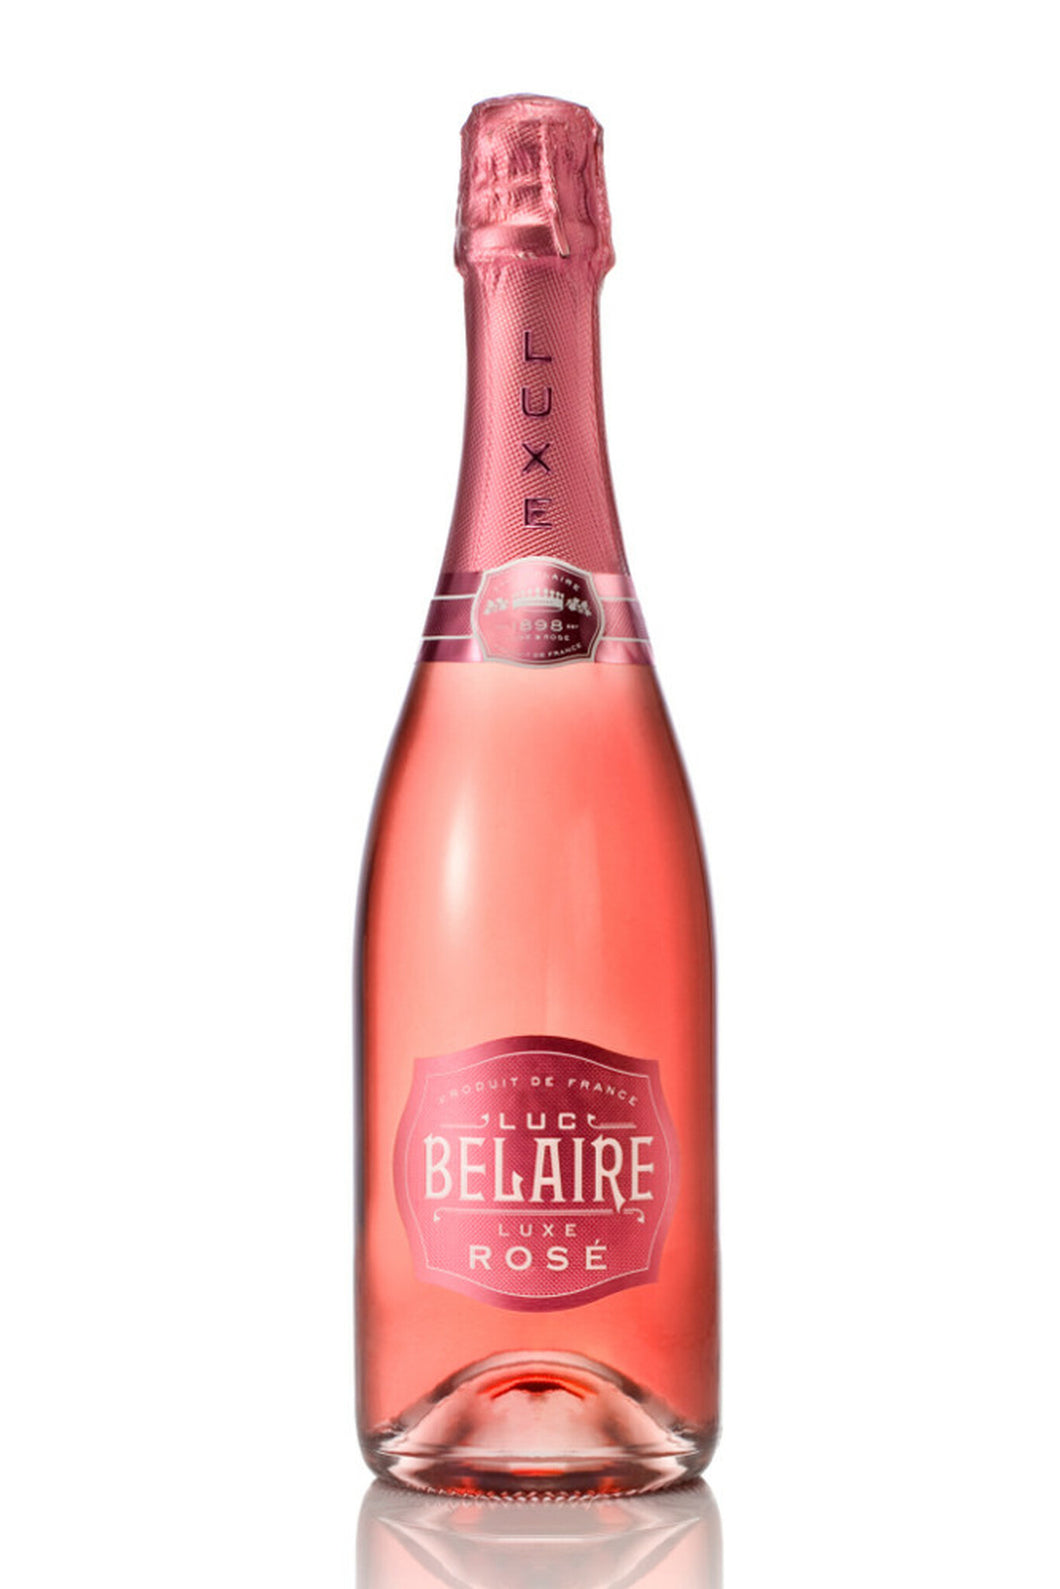 Luc Belaire Rare Luxe Rose